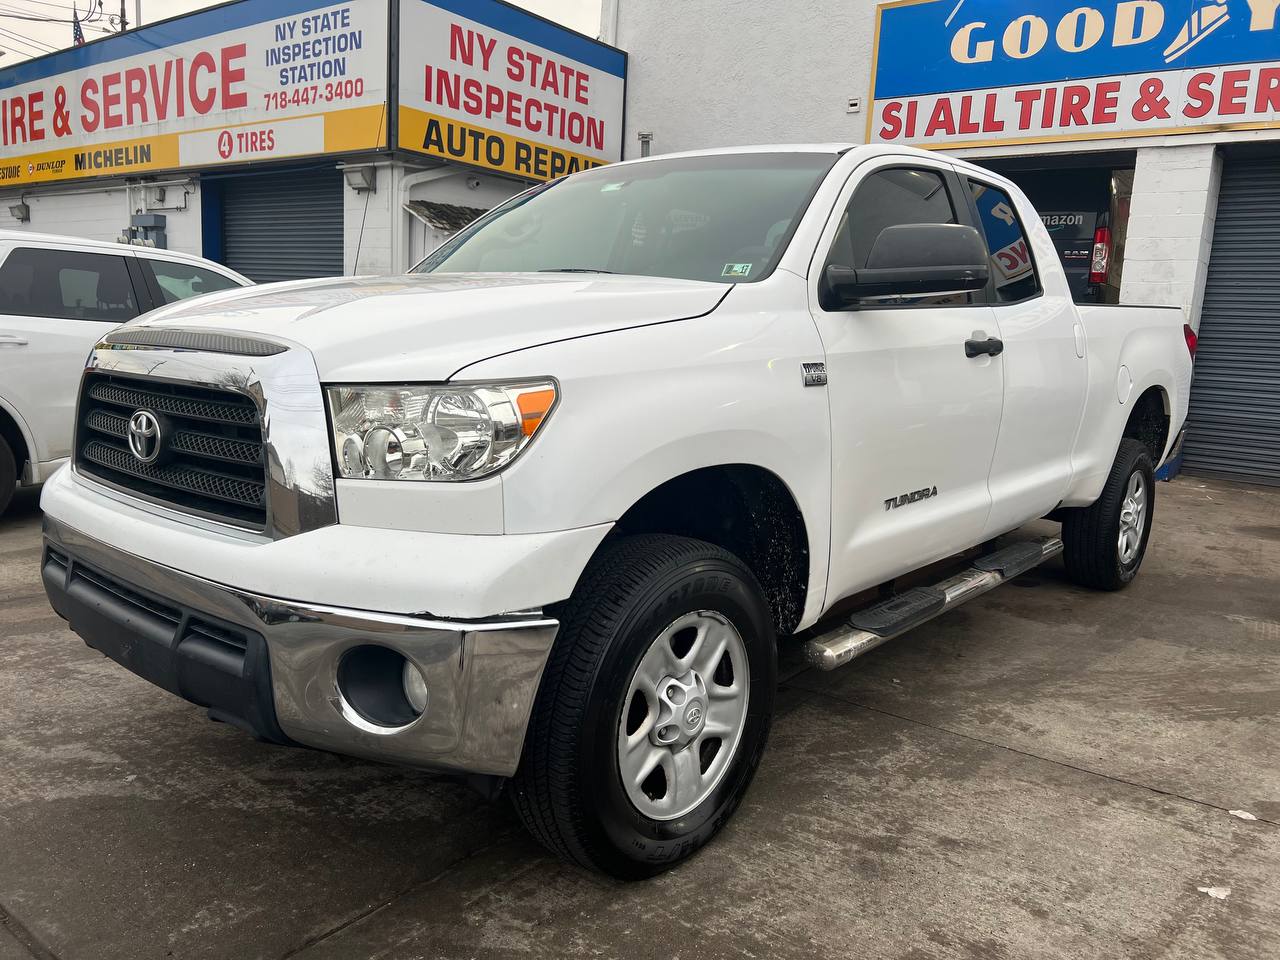 Used Car - 2008 Toyota TUNDRA GRADE for Sale in Staten Island, NY